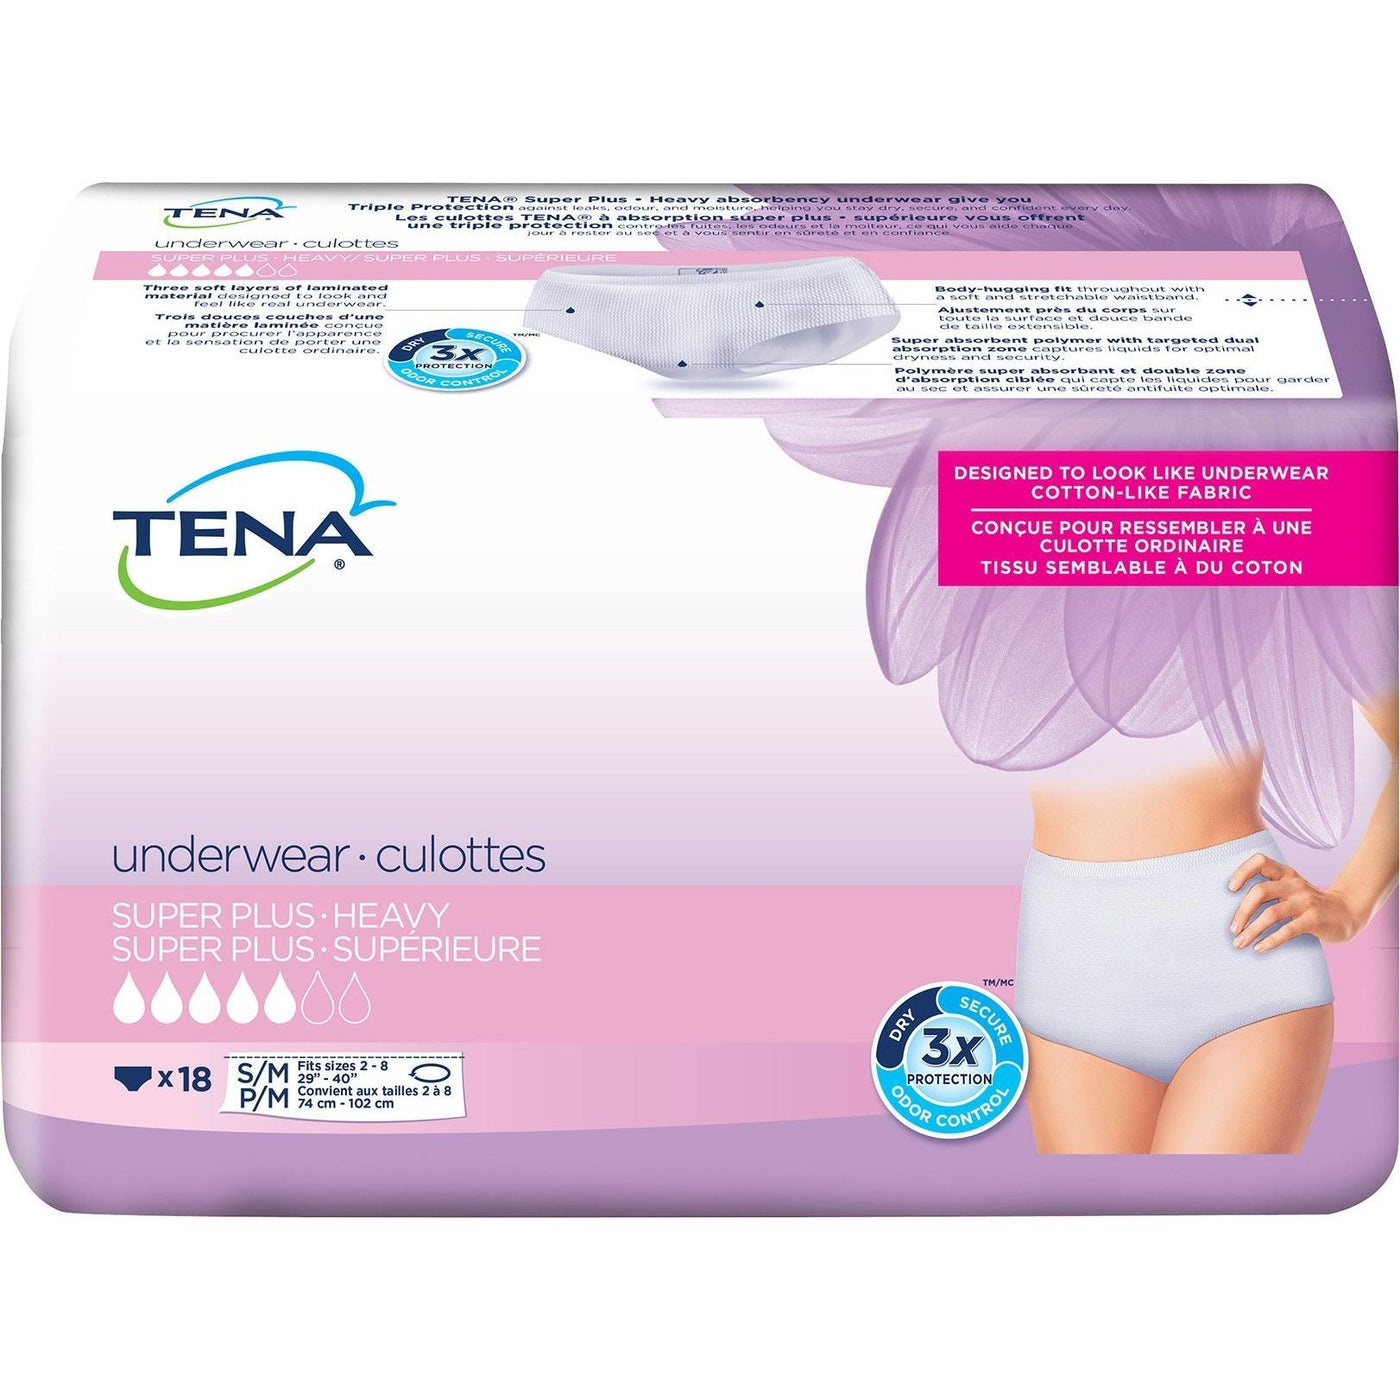 Tena Proskin Extra Protective Incontinence Underwear, Moderate Absorbency,  Unisex, Small, 16 Count : Target